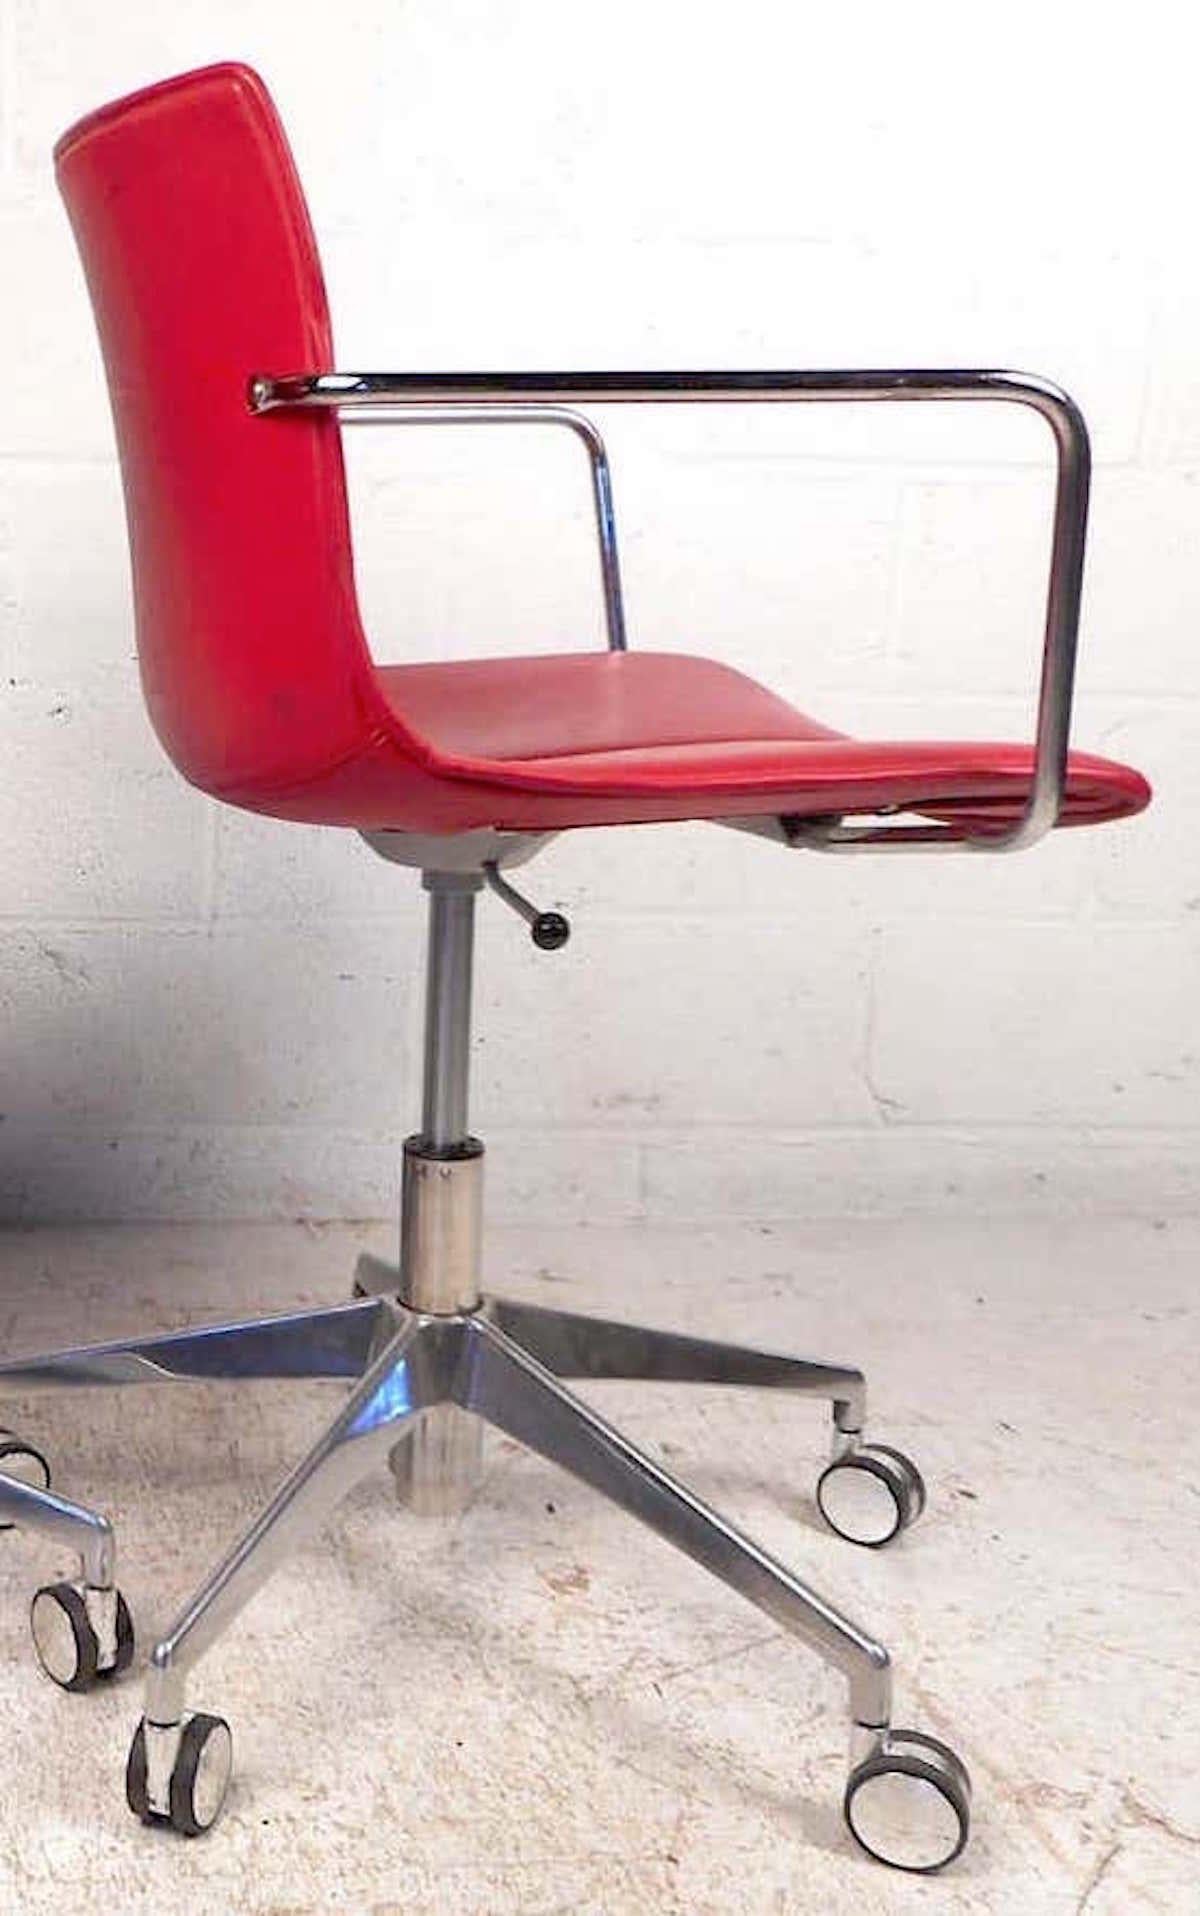 Comfortable form-fitting seat covered in a vibrant red faux-leather upholstery. Sturdy chrome supports, bases, and armrests. Adjustable height settings ranging from 35